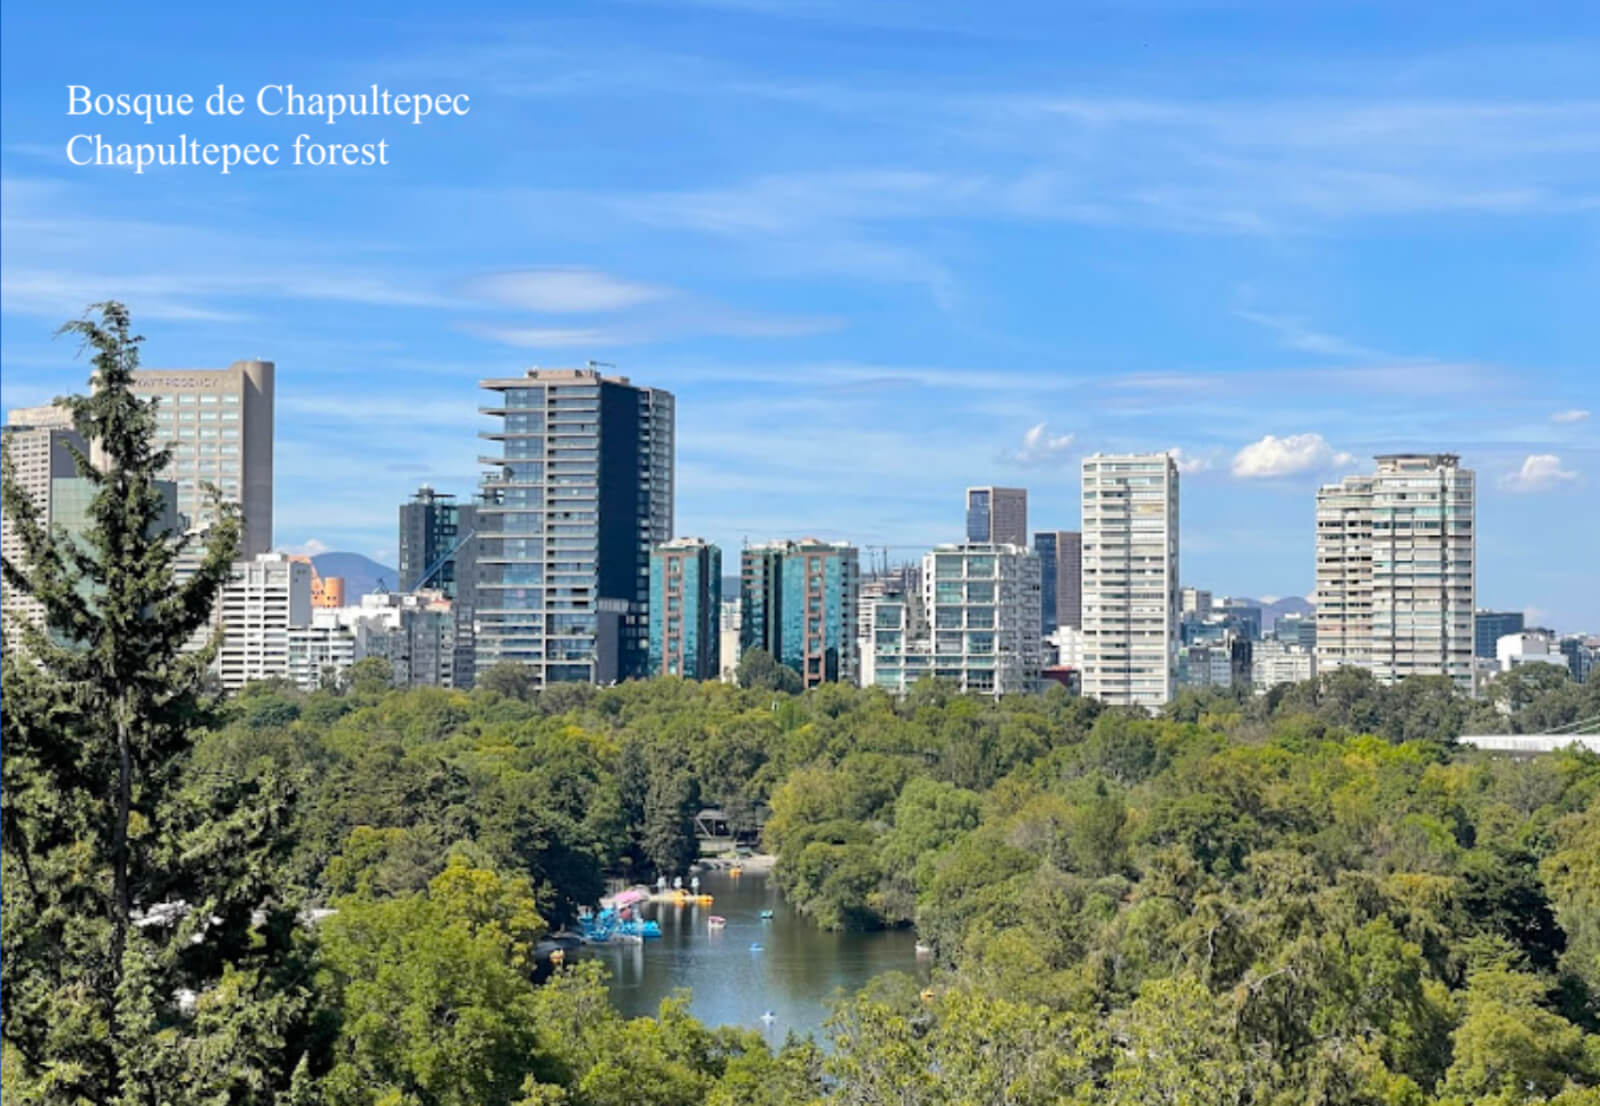 Condominium with a 24 m2 terrace overlooking the Chapultepec forest, maid&amp;#39;s room with bathroom, height of 3.10 meters, heliport, bar and res